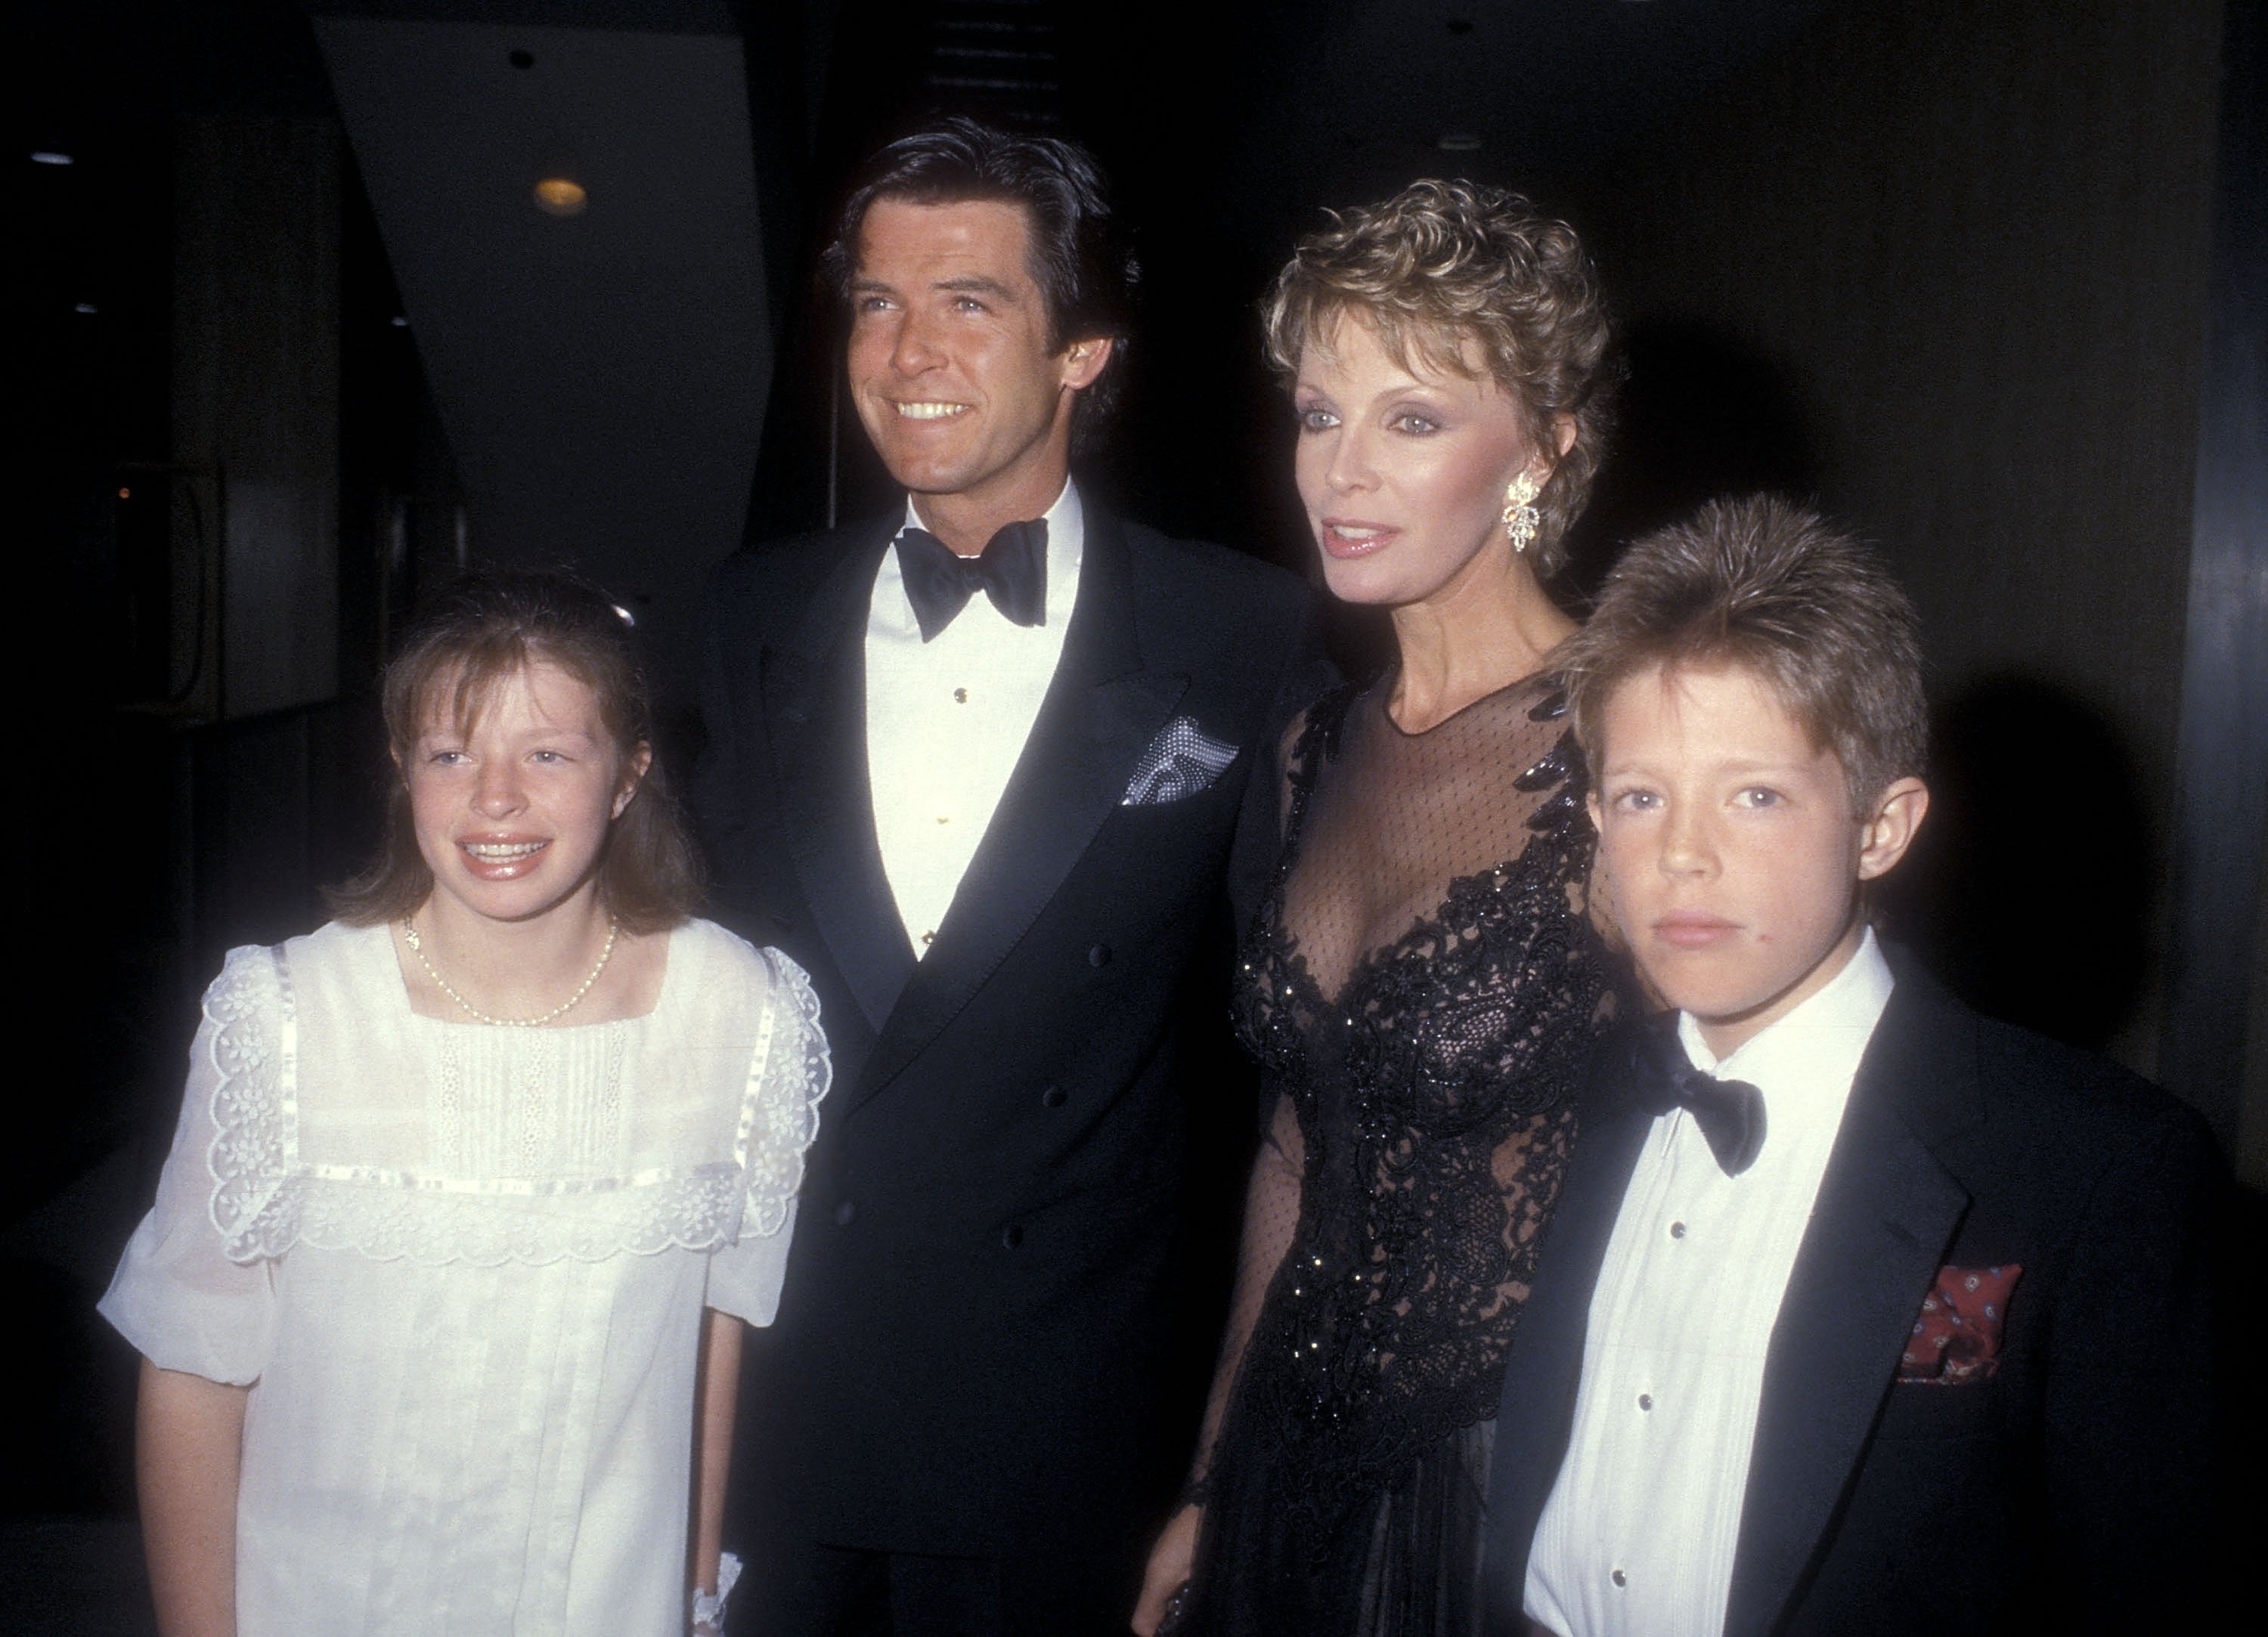 Actor Pierce Brosnan, wife Cassandra Harris, daughter Charlotte Harris and Christopher Harris attend the "Cats" Opening Night Musical Performance on January 11, 1985 | Source: Getty Images